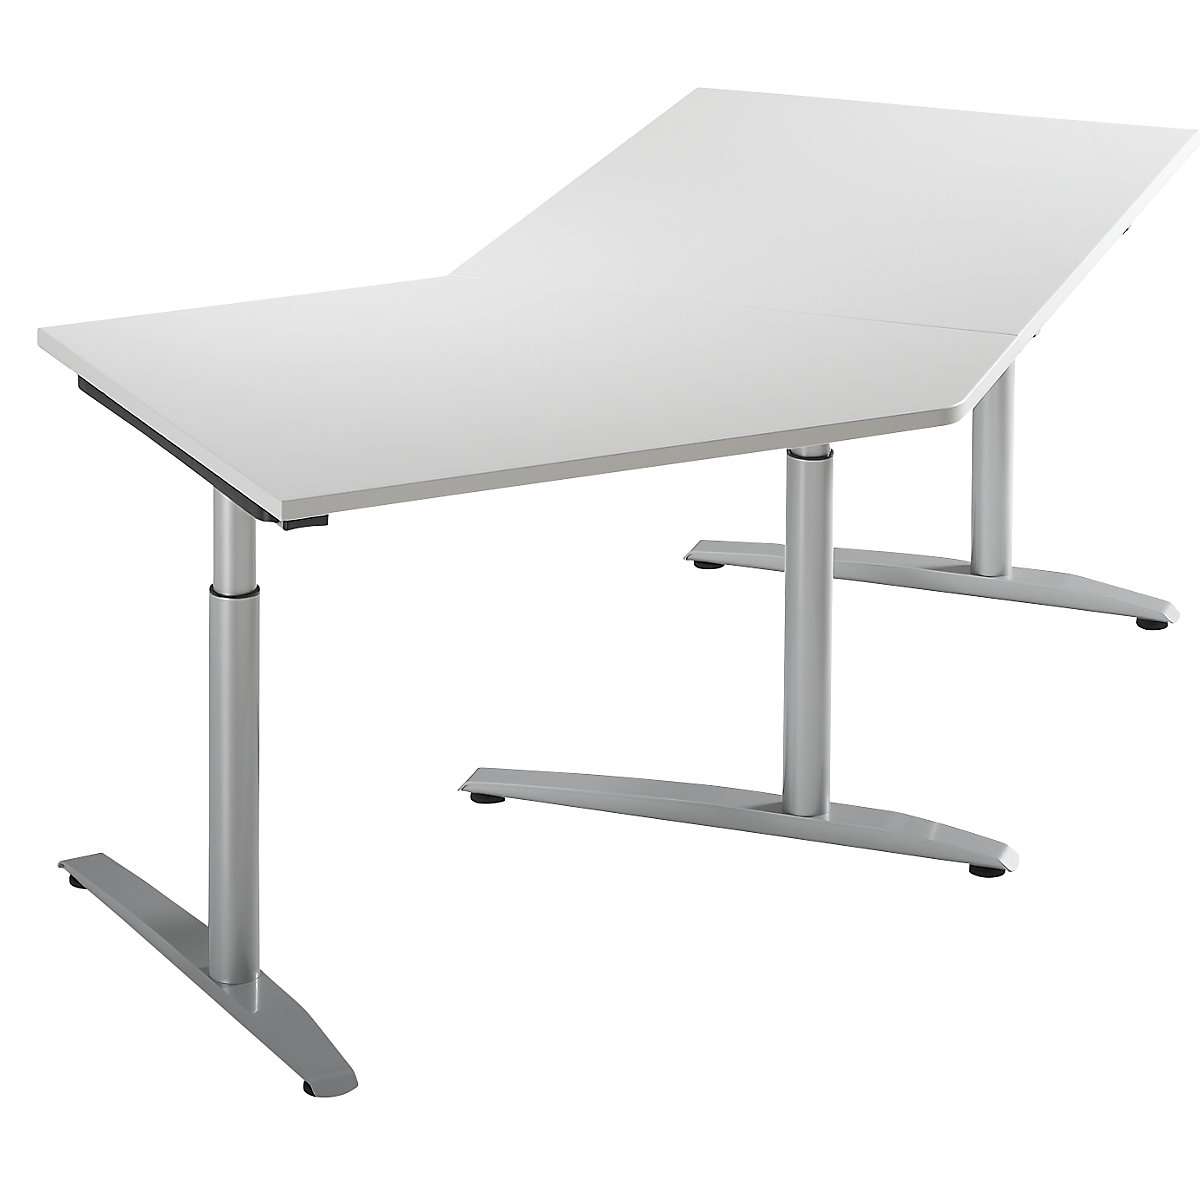 Add-on table, height adjustable from 650 – 850 mm HANNA, 45°, for left side extension, light grey-6